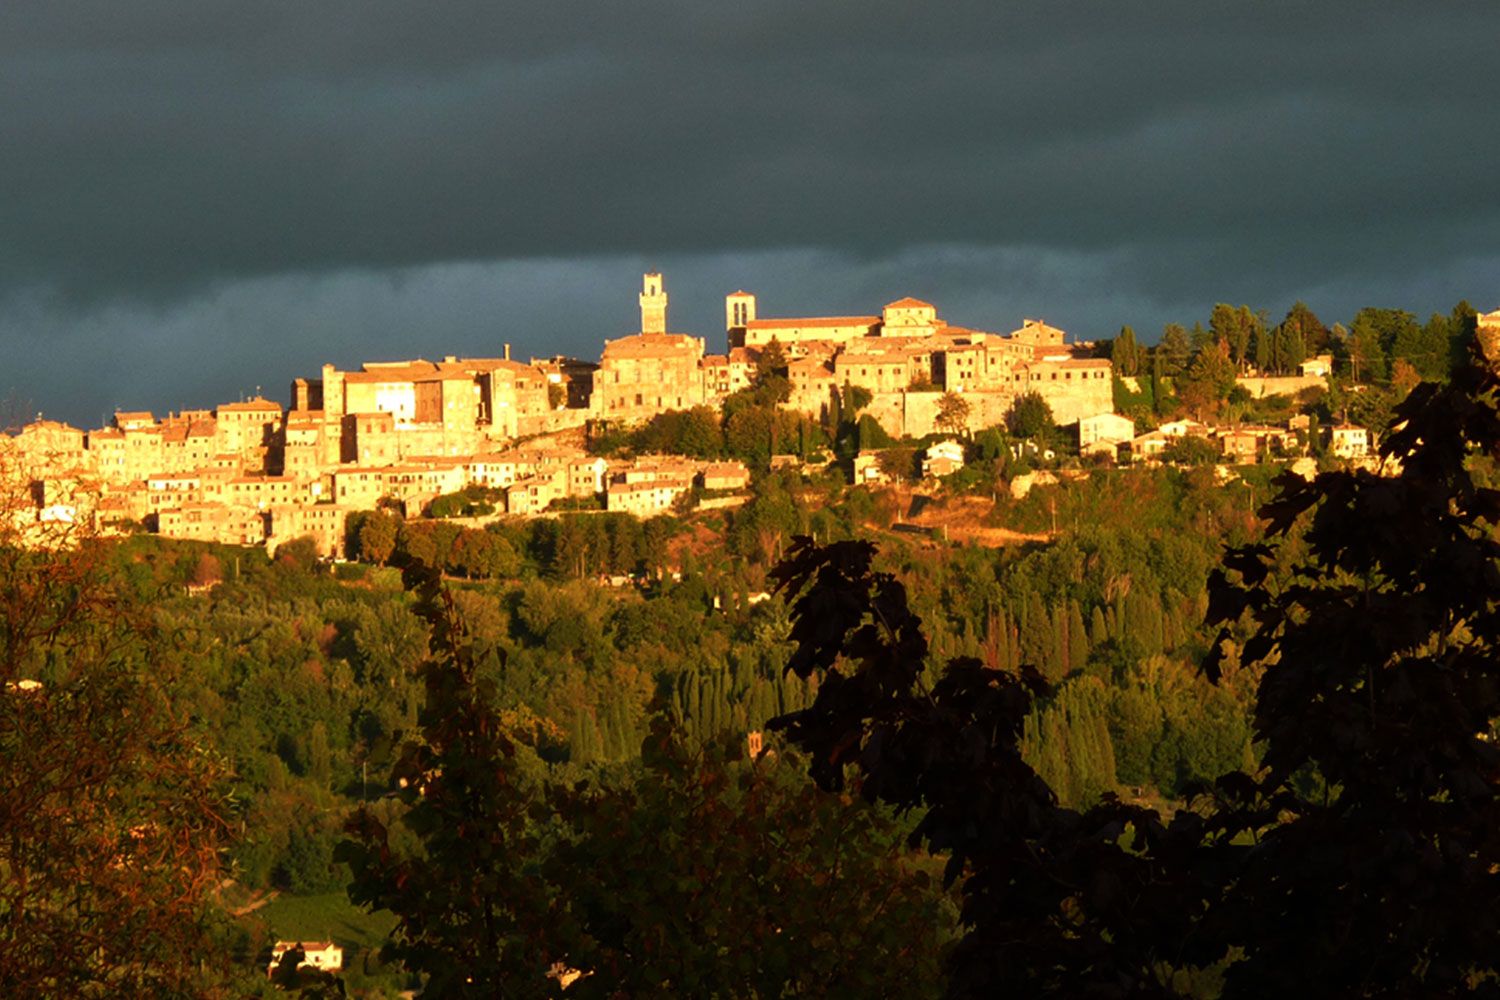 Montepulciano perched on its hill.